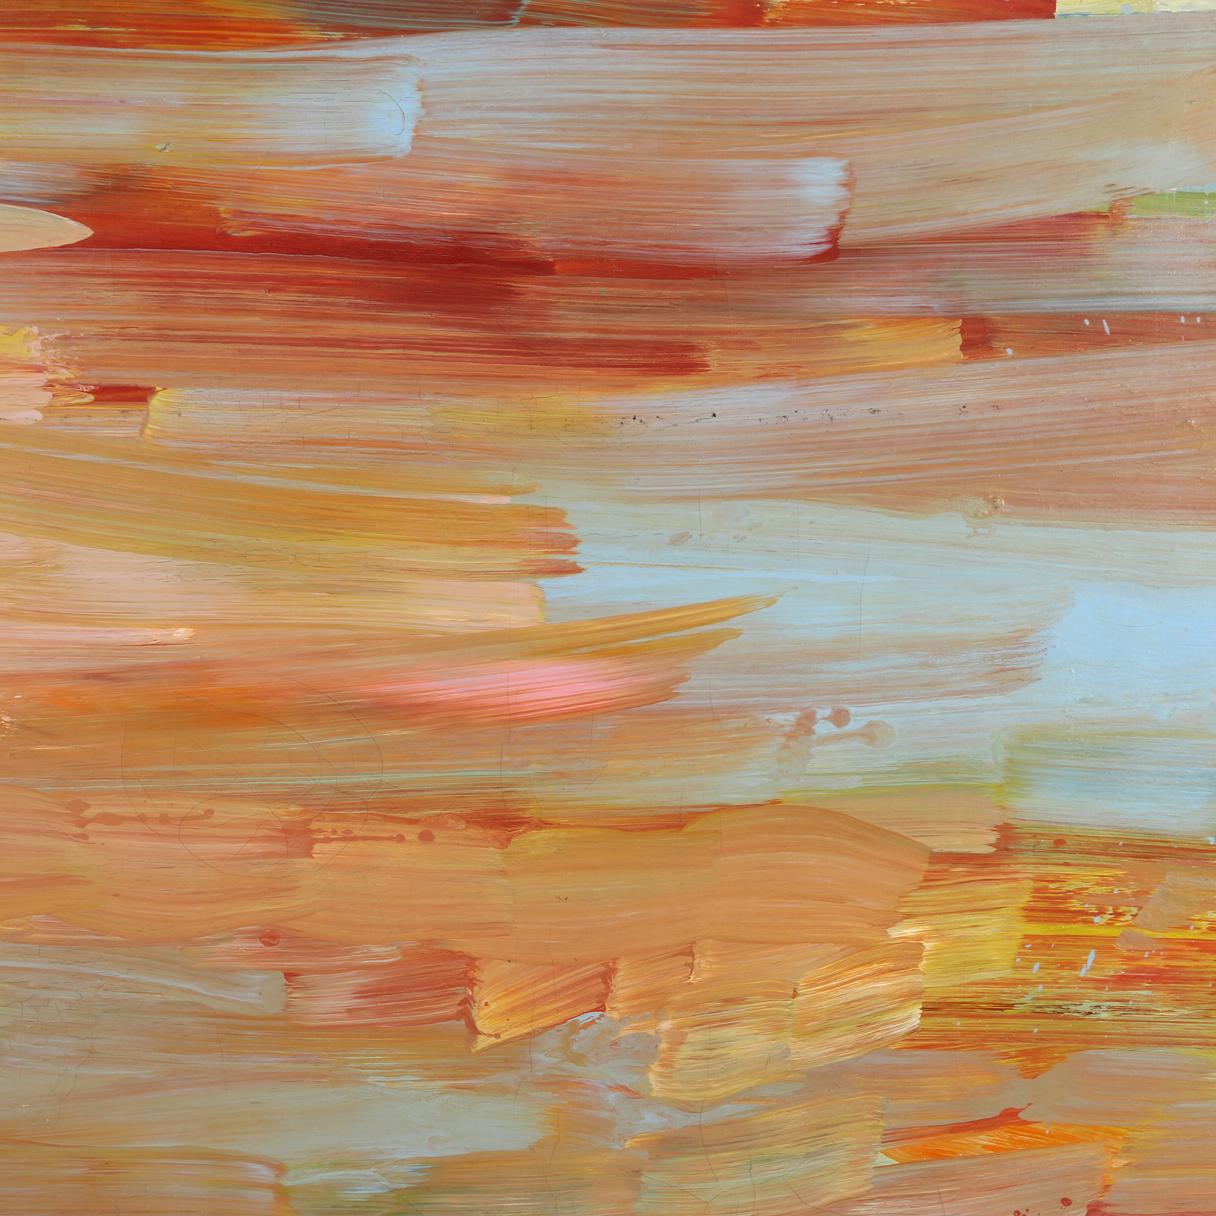 A large abstract painting by noted American artist, Pat Lipsky.  The mid-century painting in various shades of orange, gold, red and blue are washed across the canvas with horizontal strokes.  